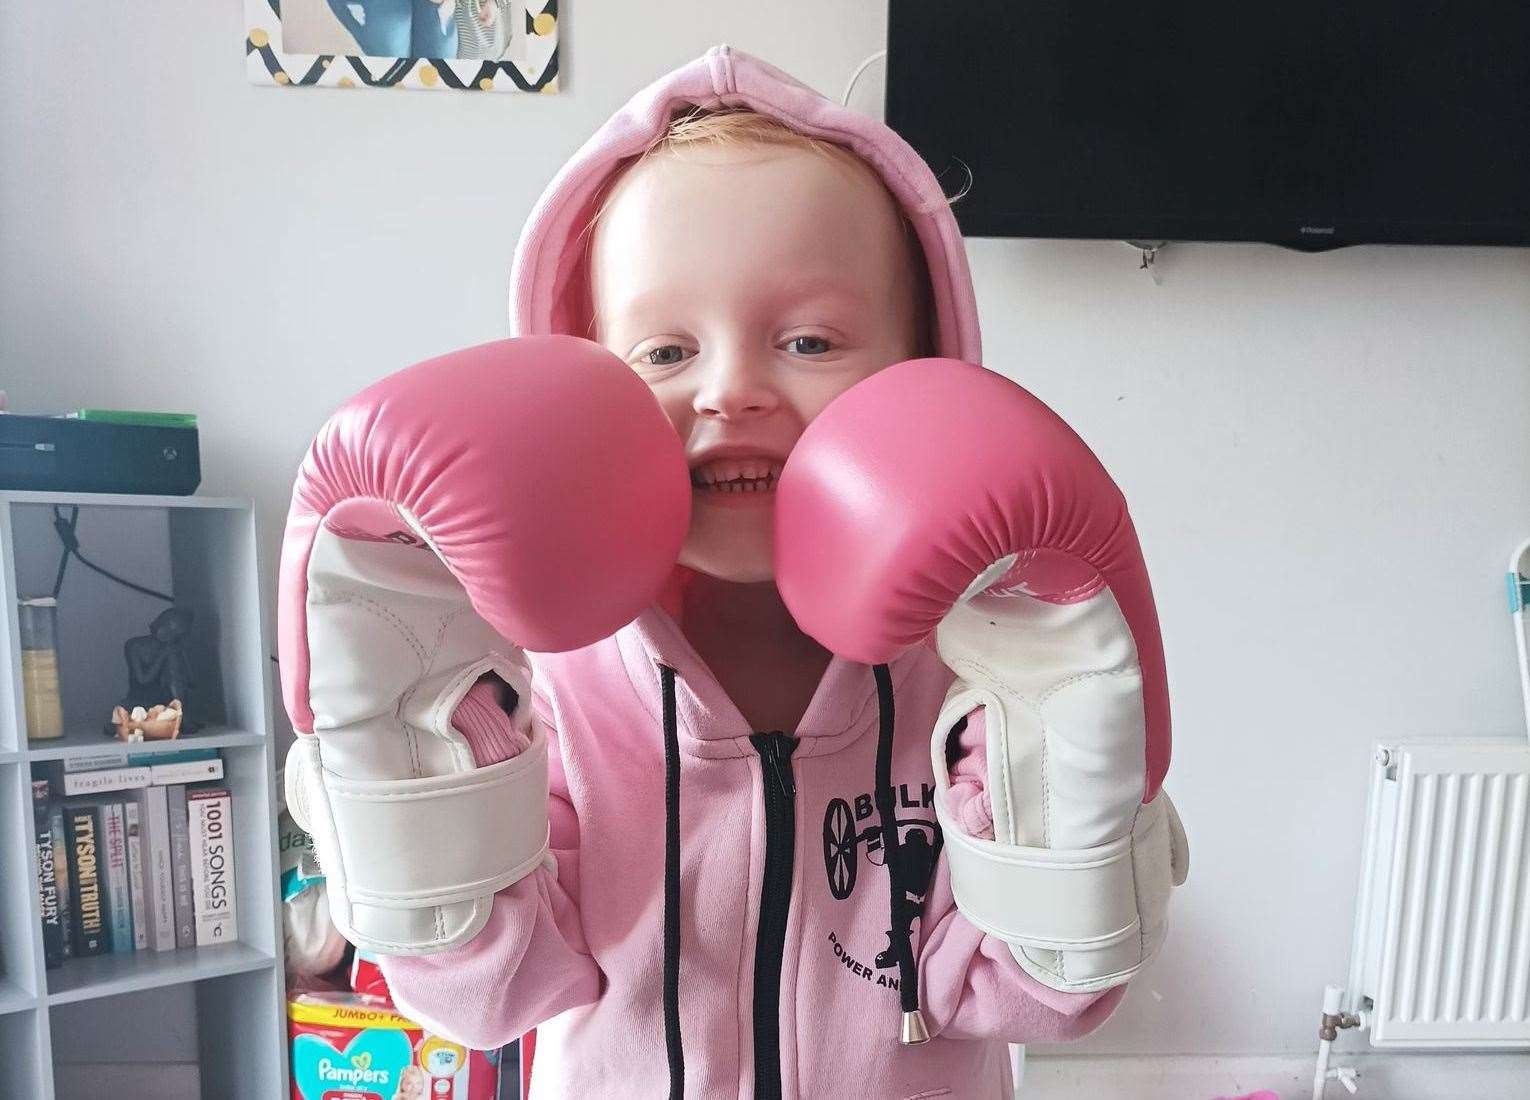 Lola-Rose is a fighter and is now back home. Picture: Alan Raine